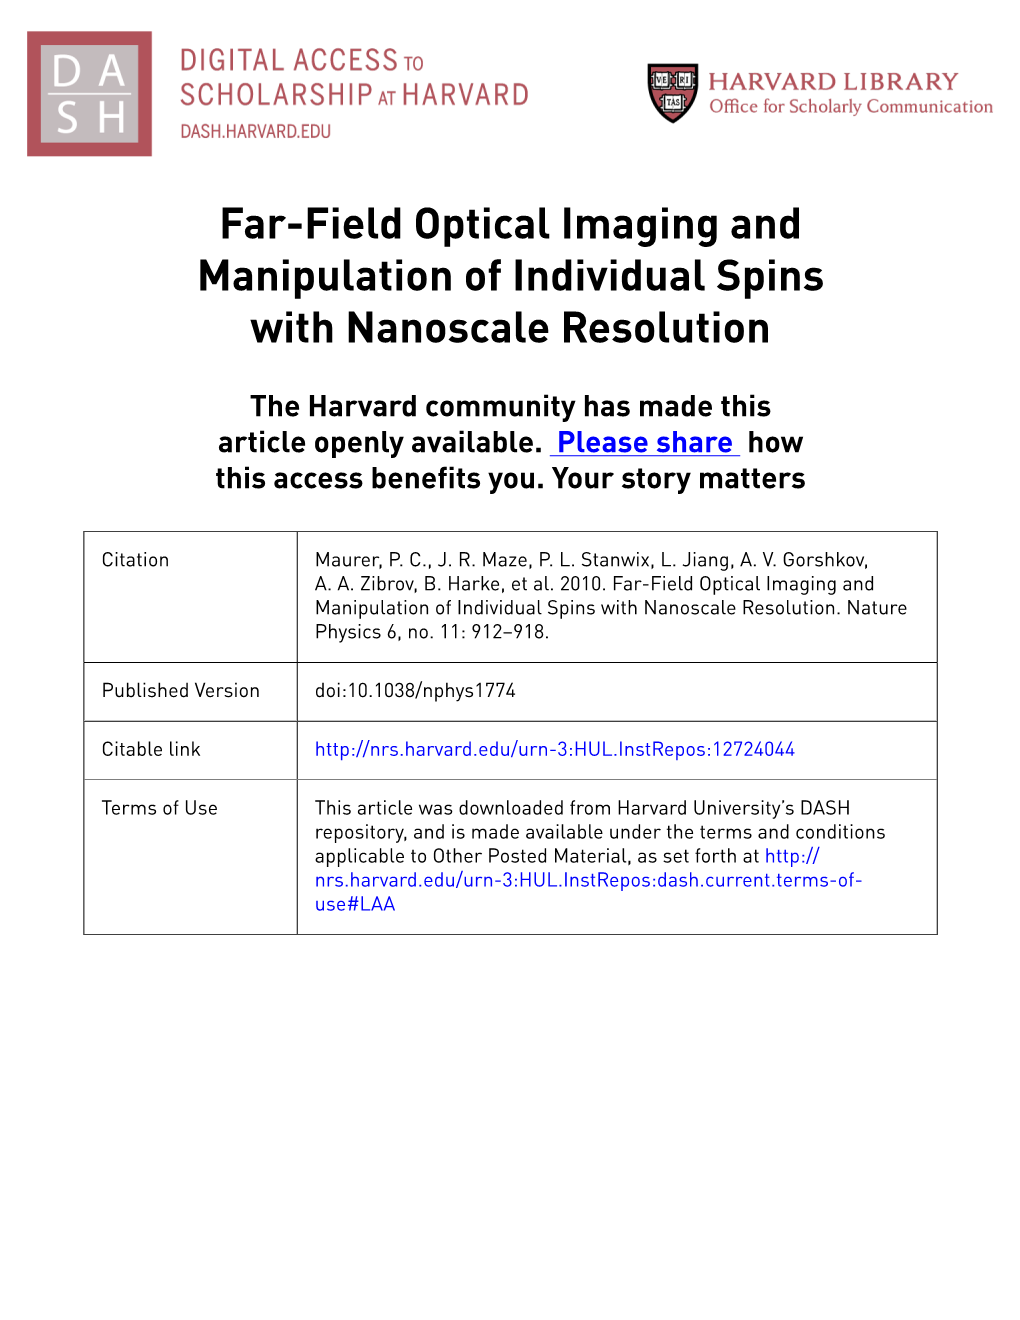 Far-Field Optical Imaging and Manipulation of Individual Spins with Nanoscale Resolution